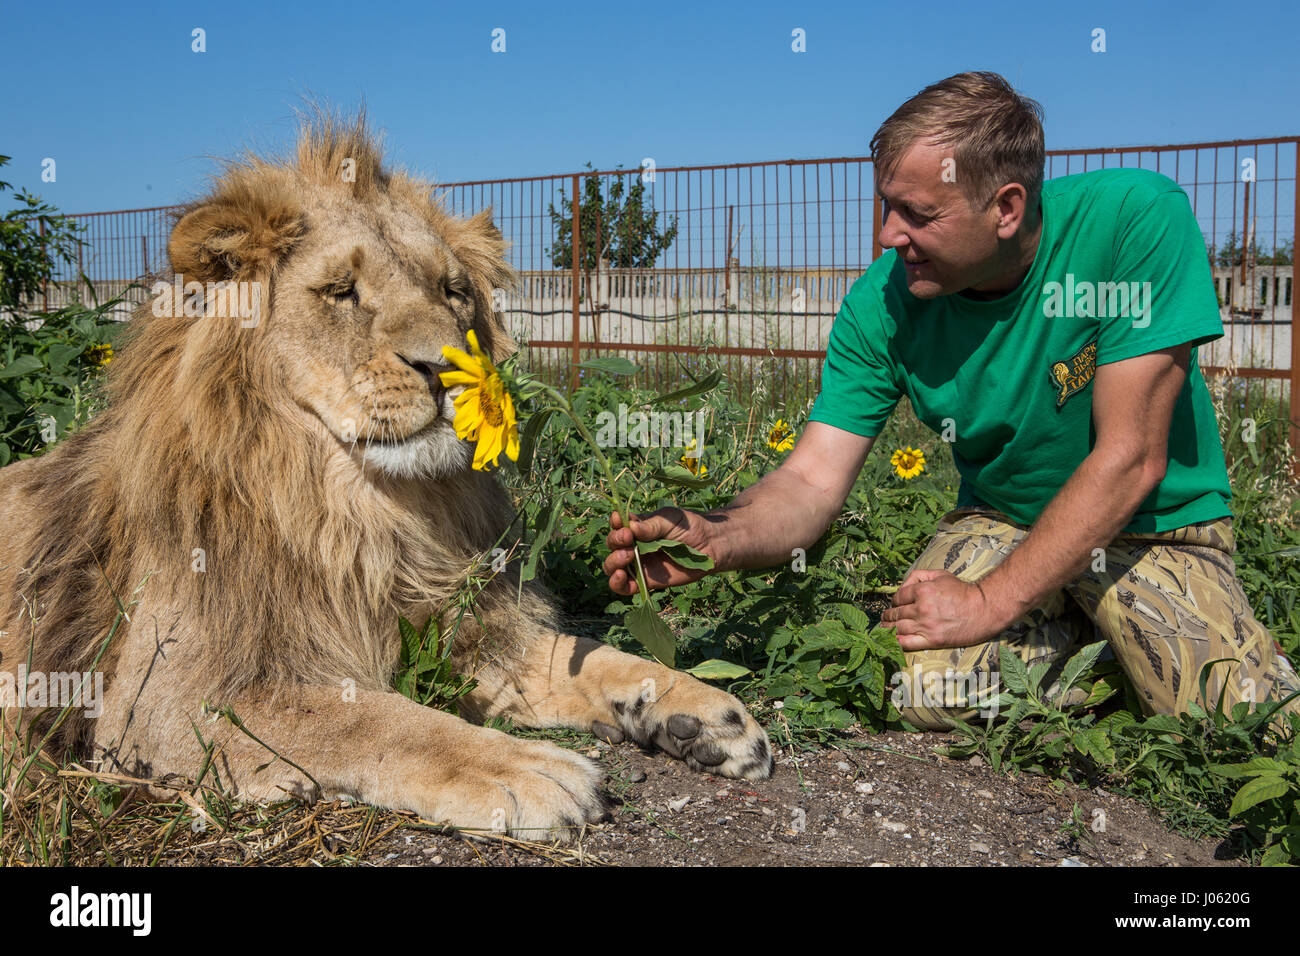 Oleg Zubkov offering a lion a flower. STUNNING images showing ferocious lions and fearless humans sitting on top of each other in a field have been captured by one surprised photographer. The surreal pictures show the 418-pound lions welcoming their human companions as they happily pose for selfies, kiss each other on the mouth and one white lion even reaches out a helping paw to a man swimming in a pond.  Other images show the lions affectionately greeting people from their cars and in one incredible image, a man bravely puts his arm in the beast’s mouth to pose for the camera. The spectacula Stock Photo